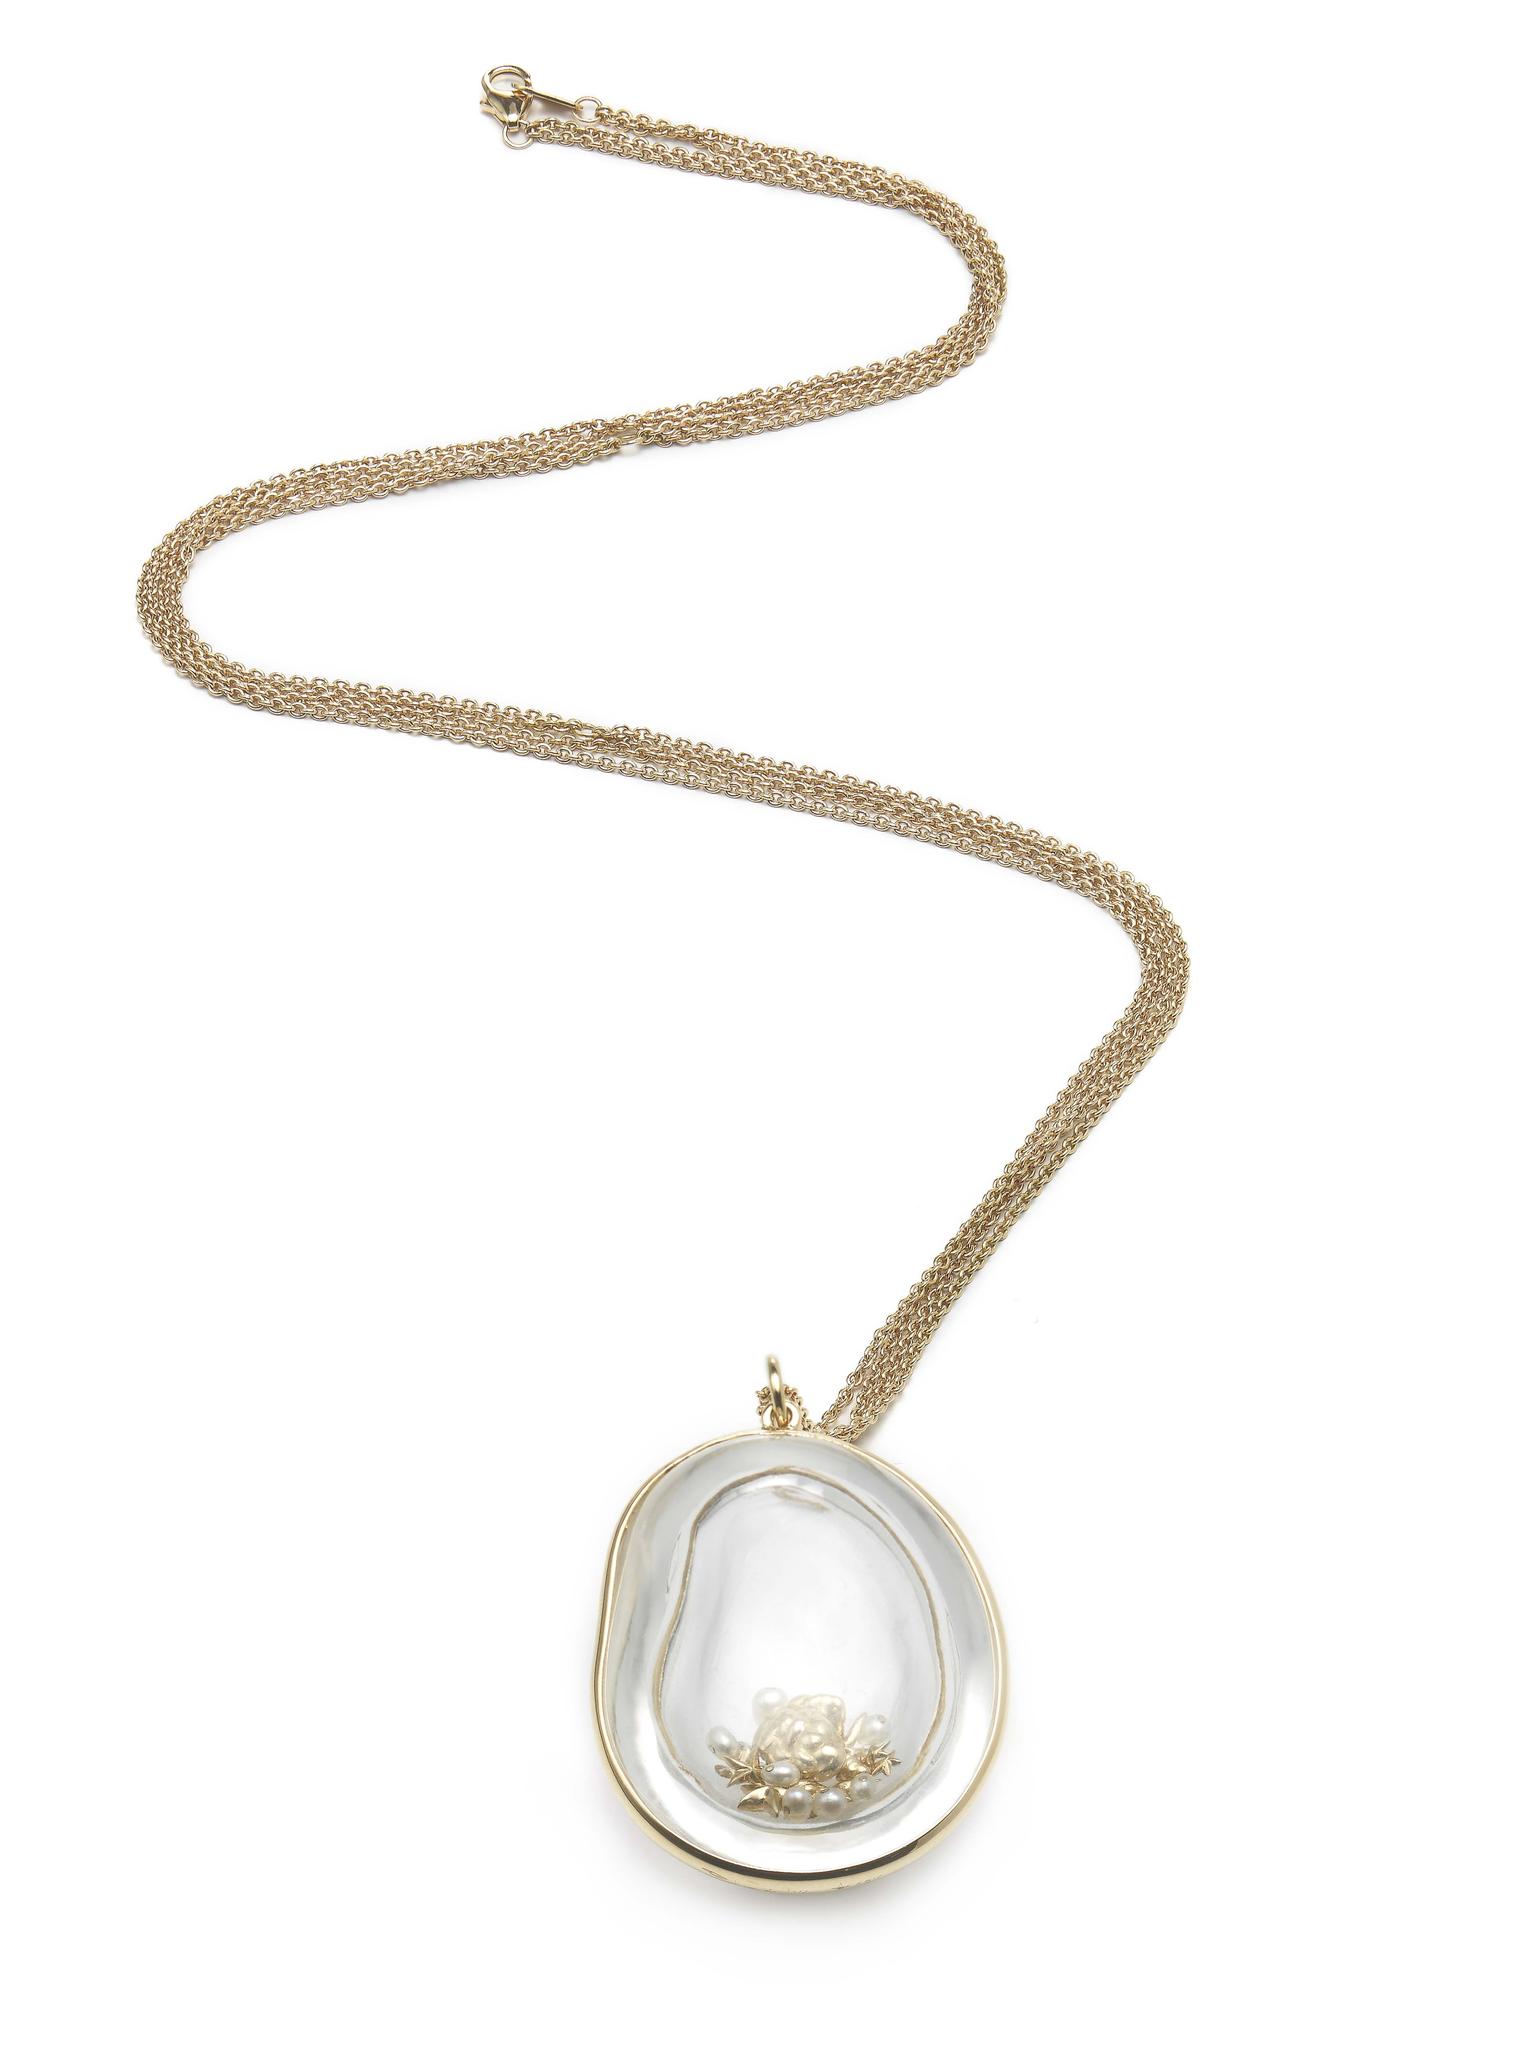 Bibi van der Velden Memorabilia necklace with a hollow bean, carved out of rock crystal, filled with pearls, gold stars and diamonds (€5,495)